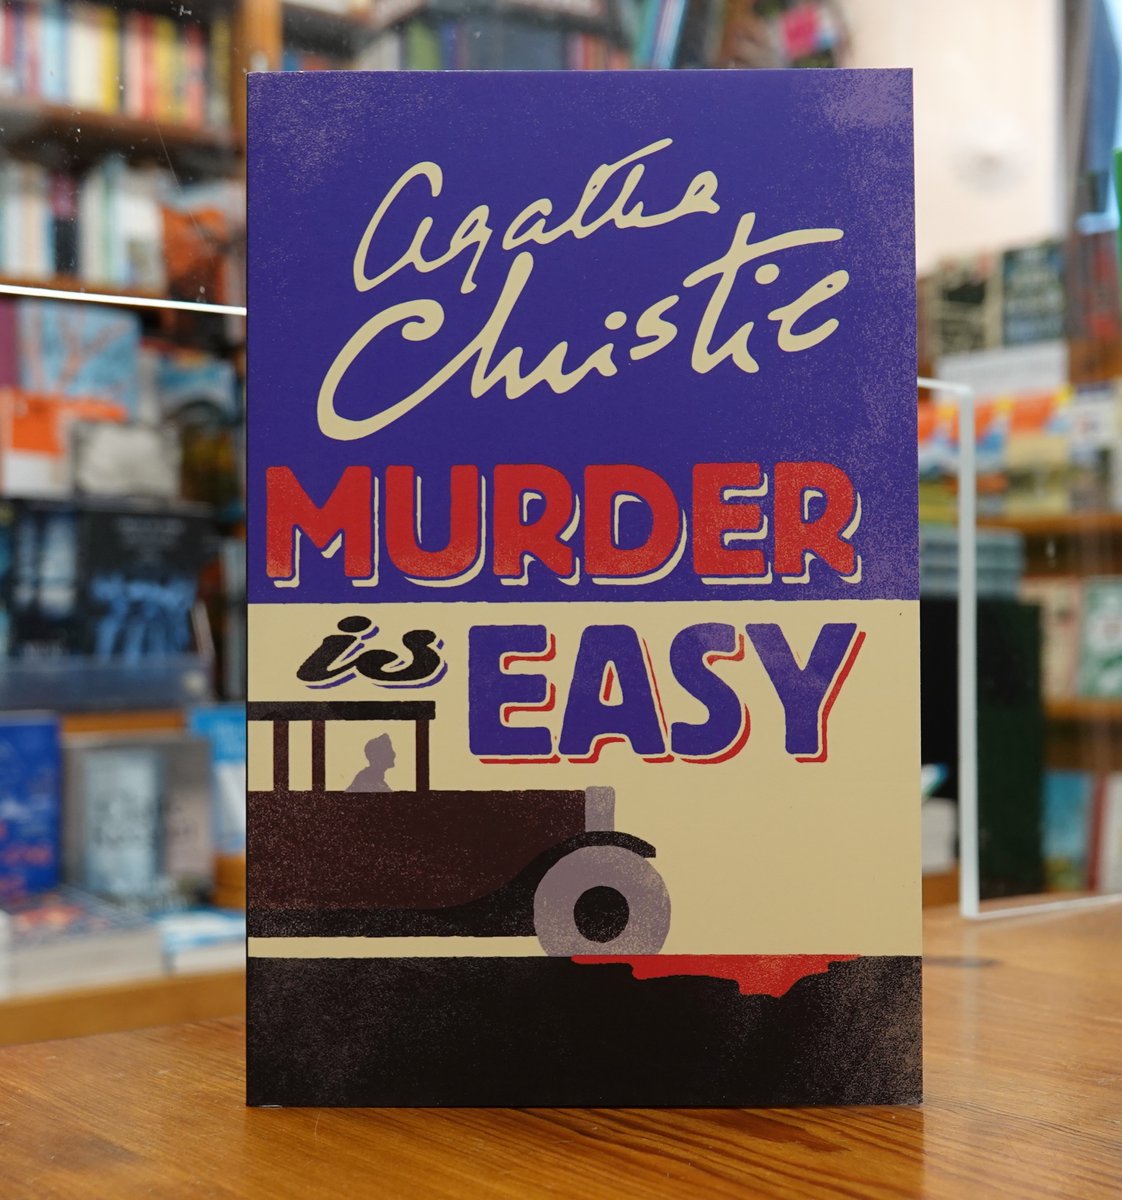 'England! England after many years! How was he going to like it?' Probably not so much when murder strikes in the quiet English village of Wychwood. Agatha Christie's #MurderIsEasy gets a new adaptation on @BBCOne tonight and tomorrow. samreadbooks.co.uk/product/agatha…